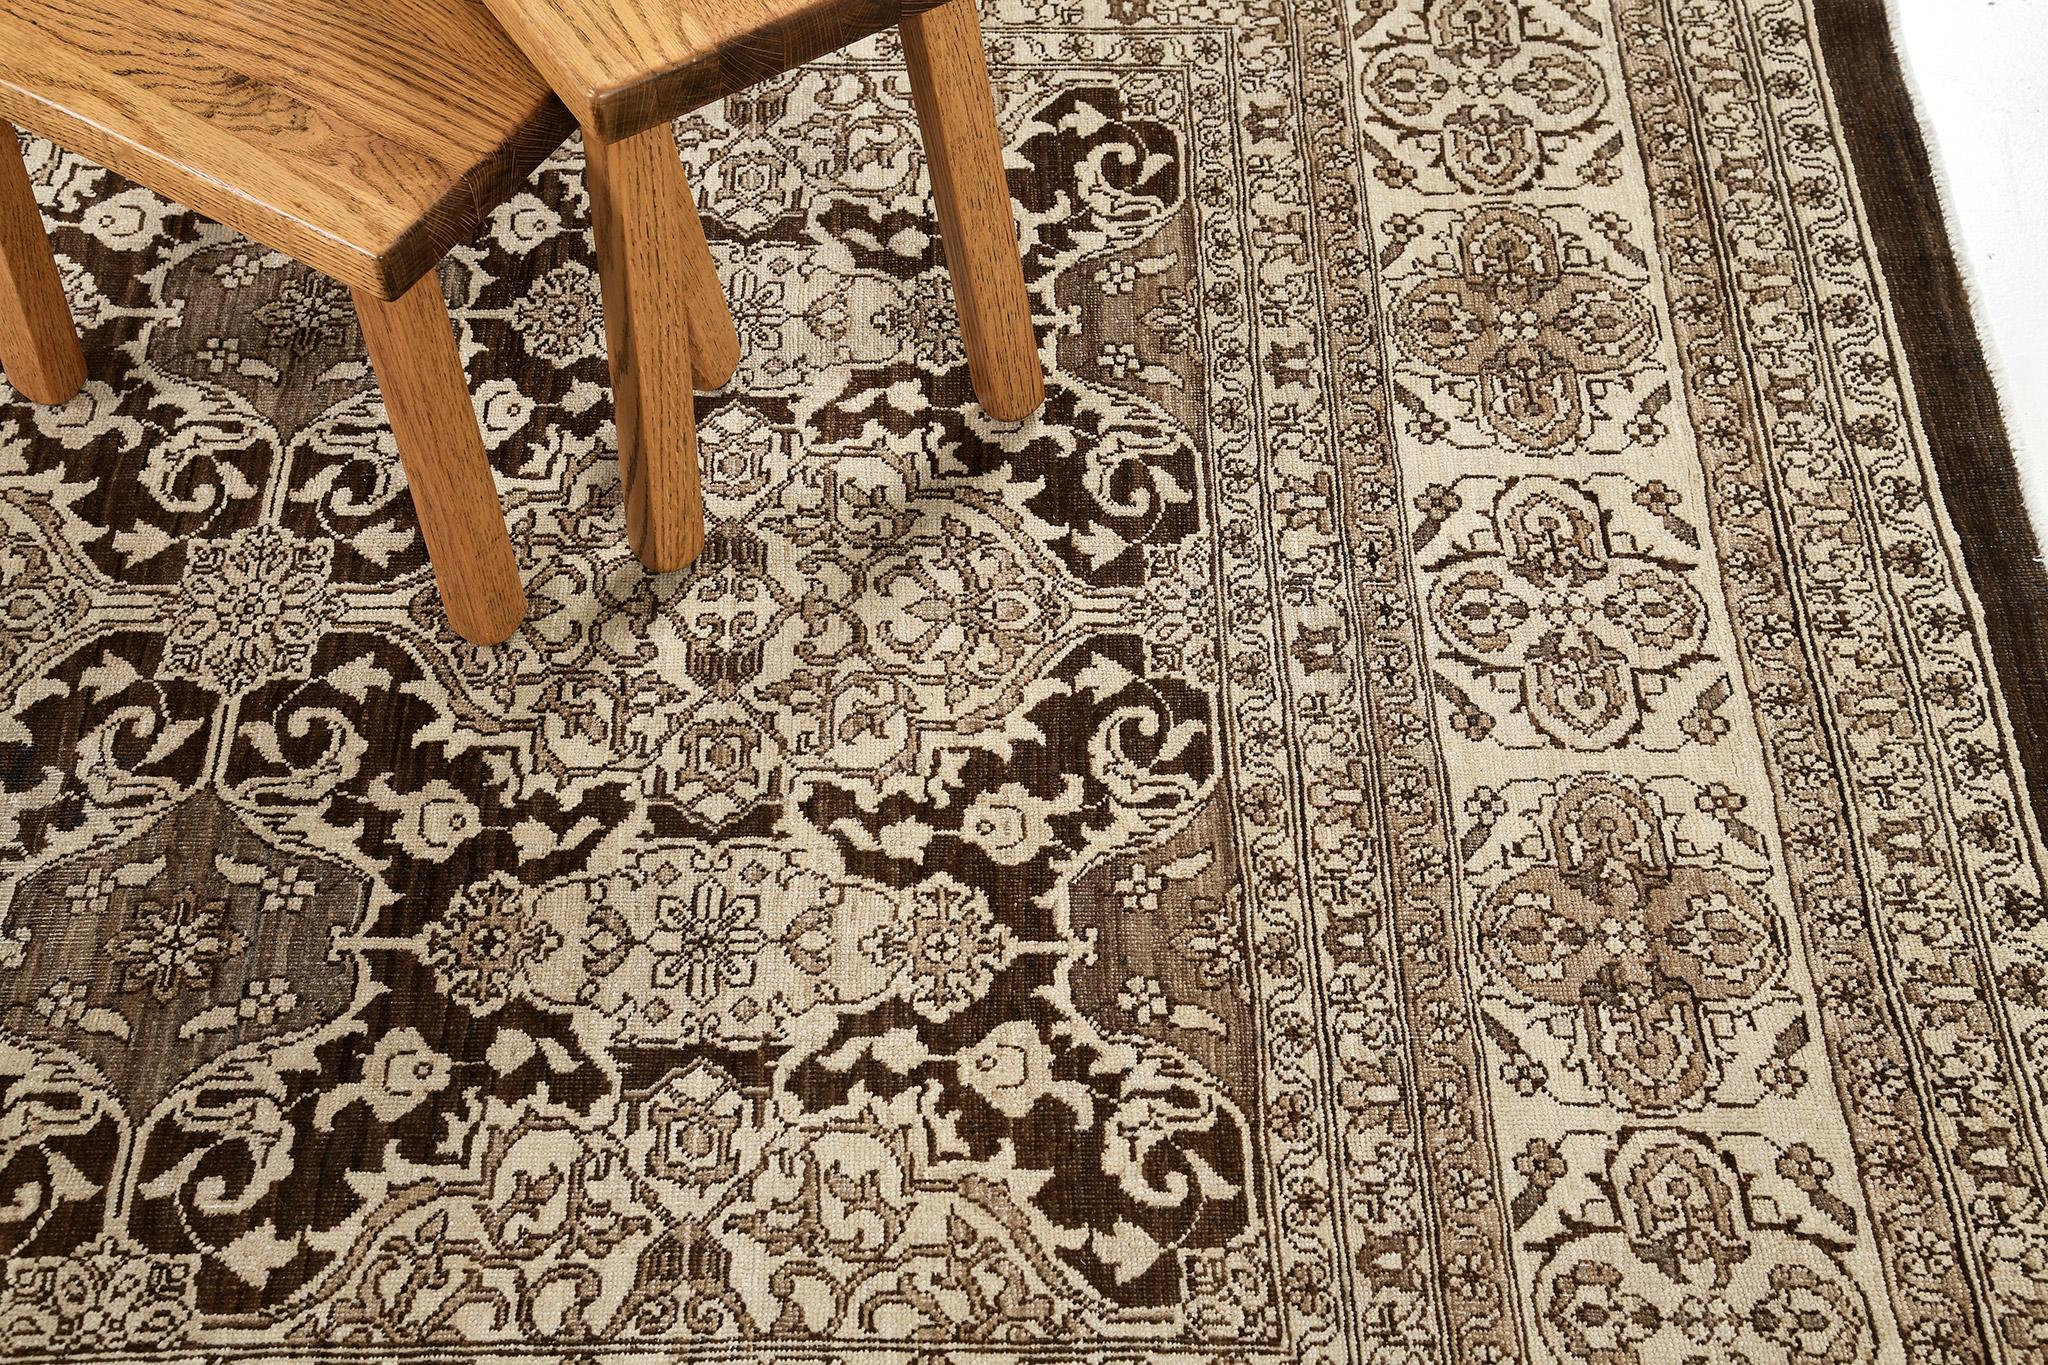 Look how this masterpiece complements each detail and making it intensely fascinating. This elegant raptured rug revival will meet traditional themed interior beyond your expectations. Elegance in repetitive medallions are well-coordinated from the